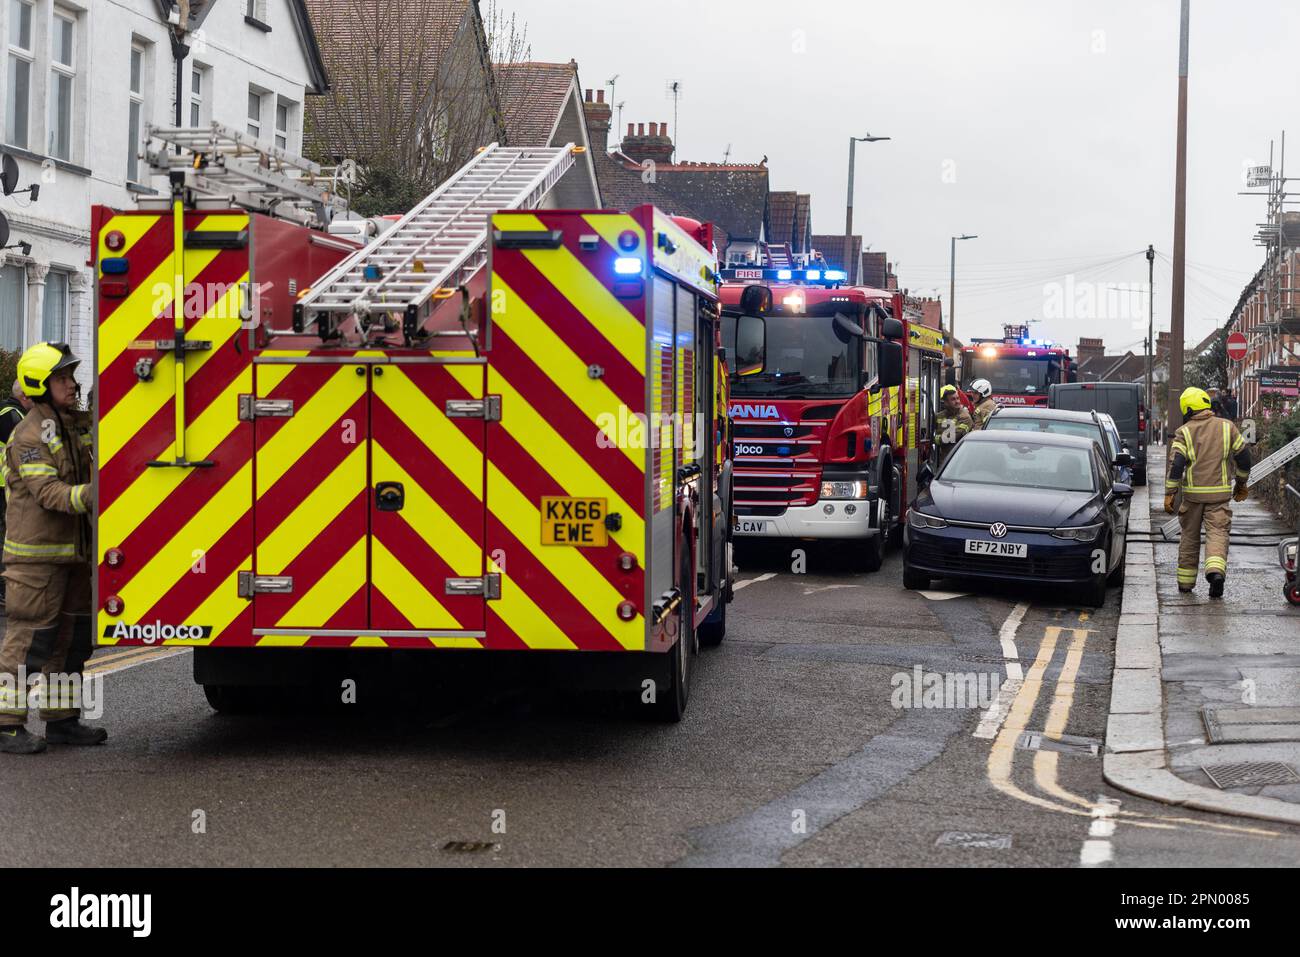 Essex County Fire & Rescue Service responding to a house fire in Westcliff on Sea, Essex, UK. Fire engines in street with firefighters Stock Photo